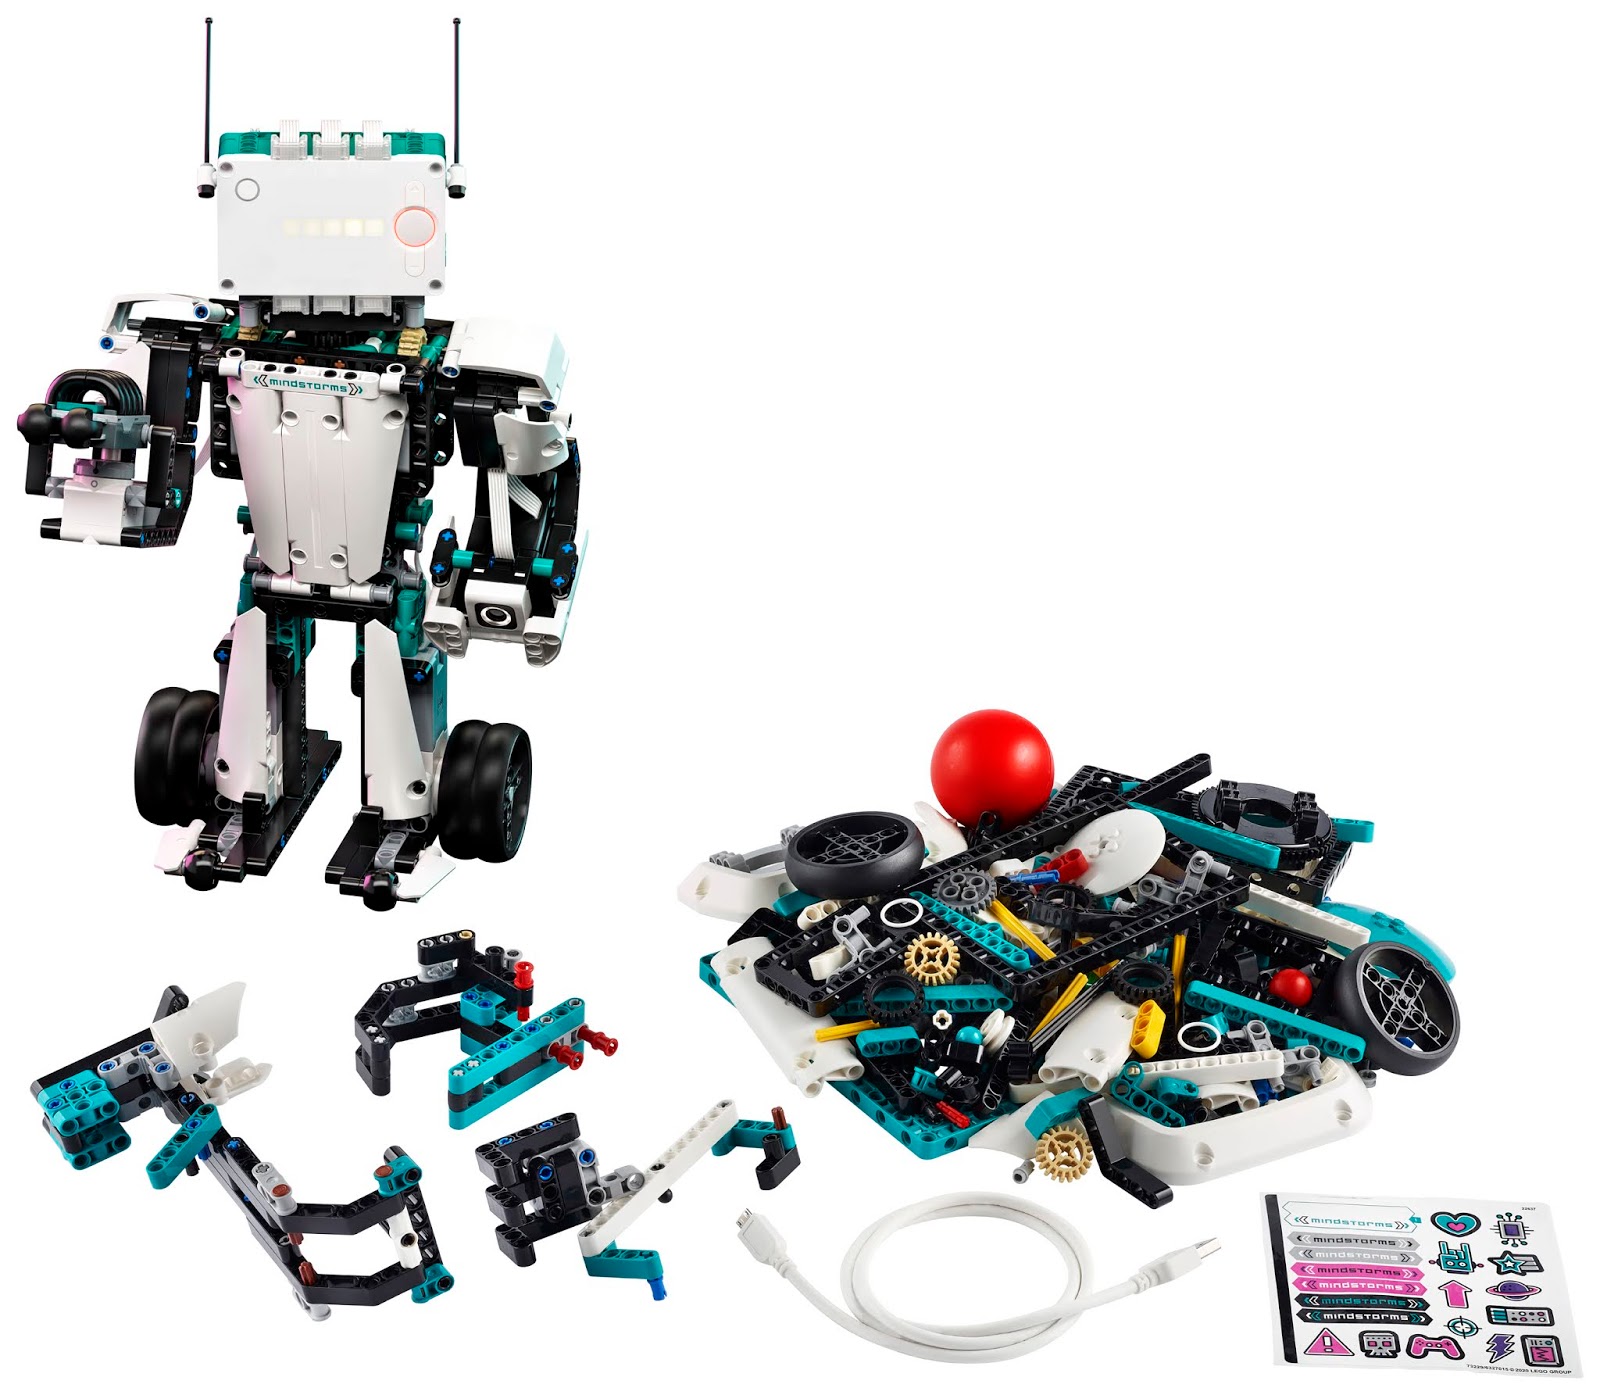 LEGO® 51515 Robot Inventor: reveal and interview | New Elementary: LEGO® parts, techniques